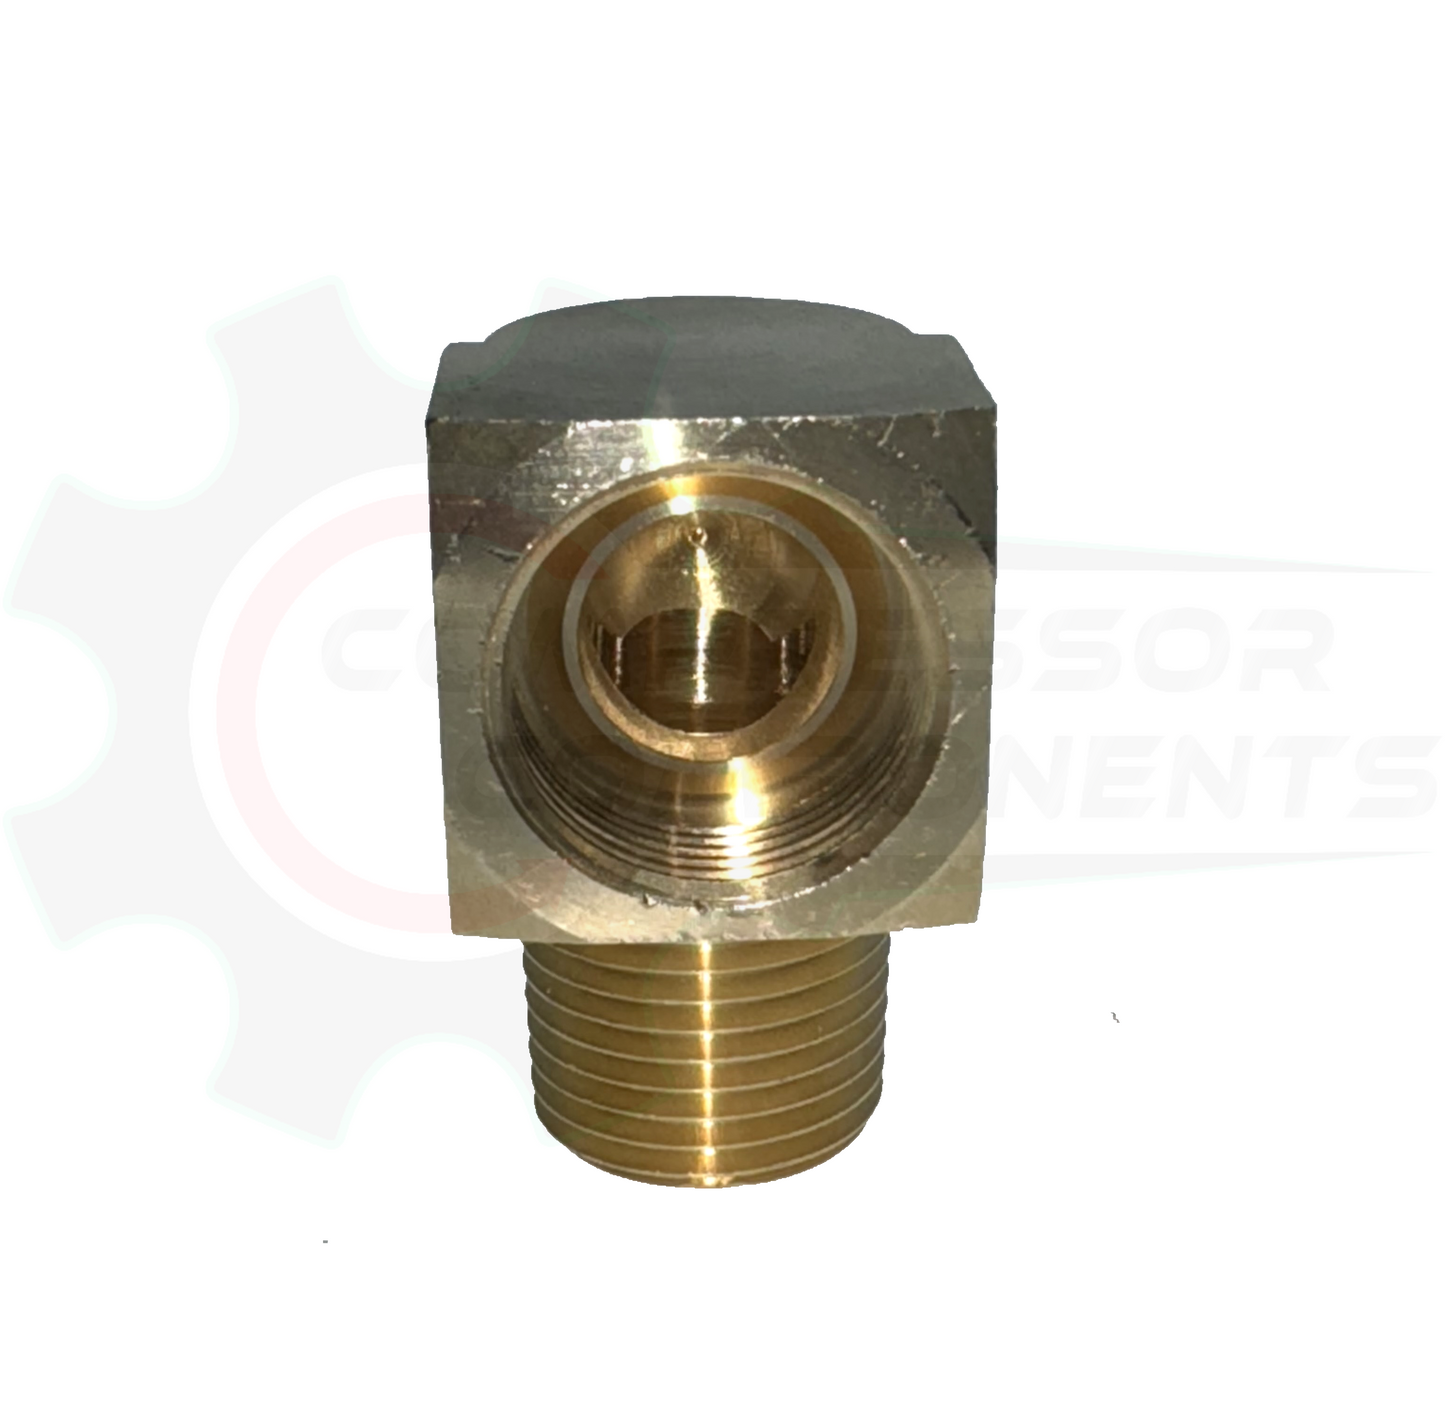 BRASS 5/8" INVERTED FLARE 90 DEGREE ELBOW X 1/2" MNPT ADAPTER / INGERSOLL-RAND 95031795